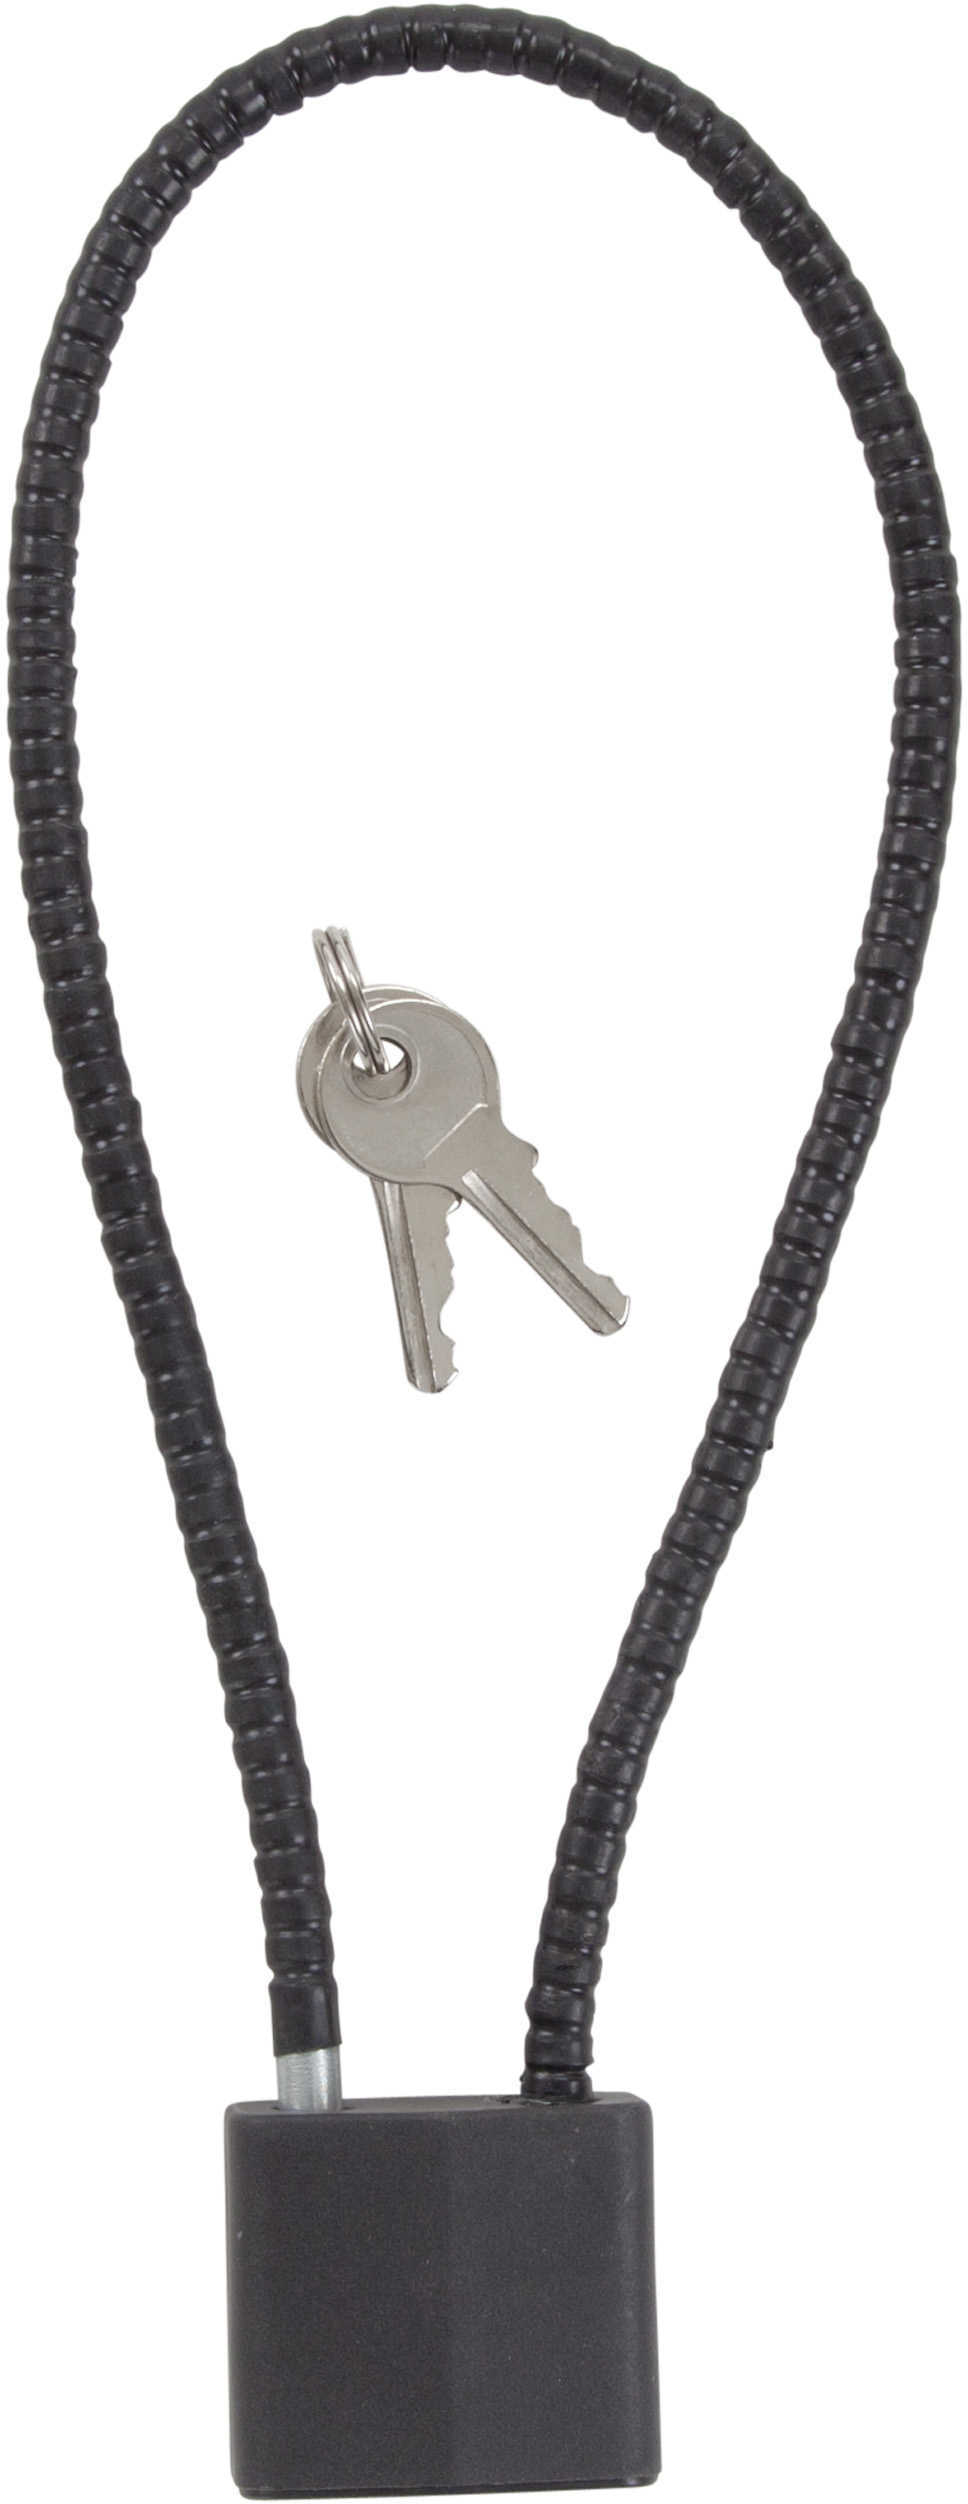 Cable Lock - (15") Black Md: 15414 Allen Cases